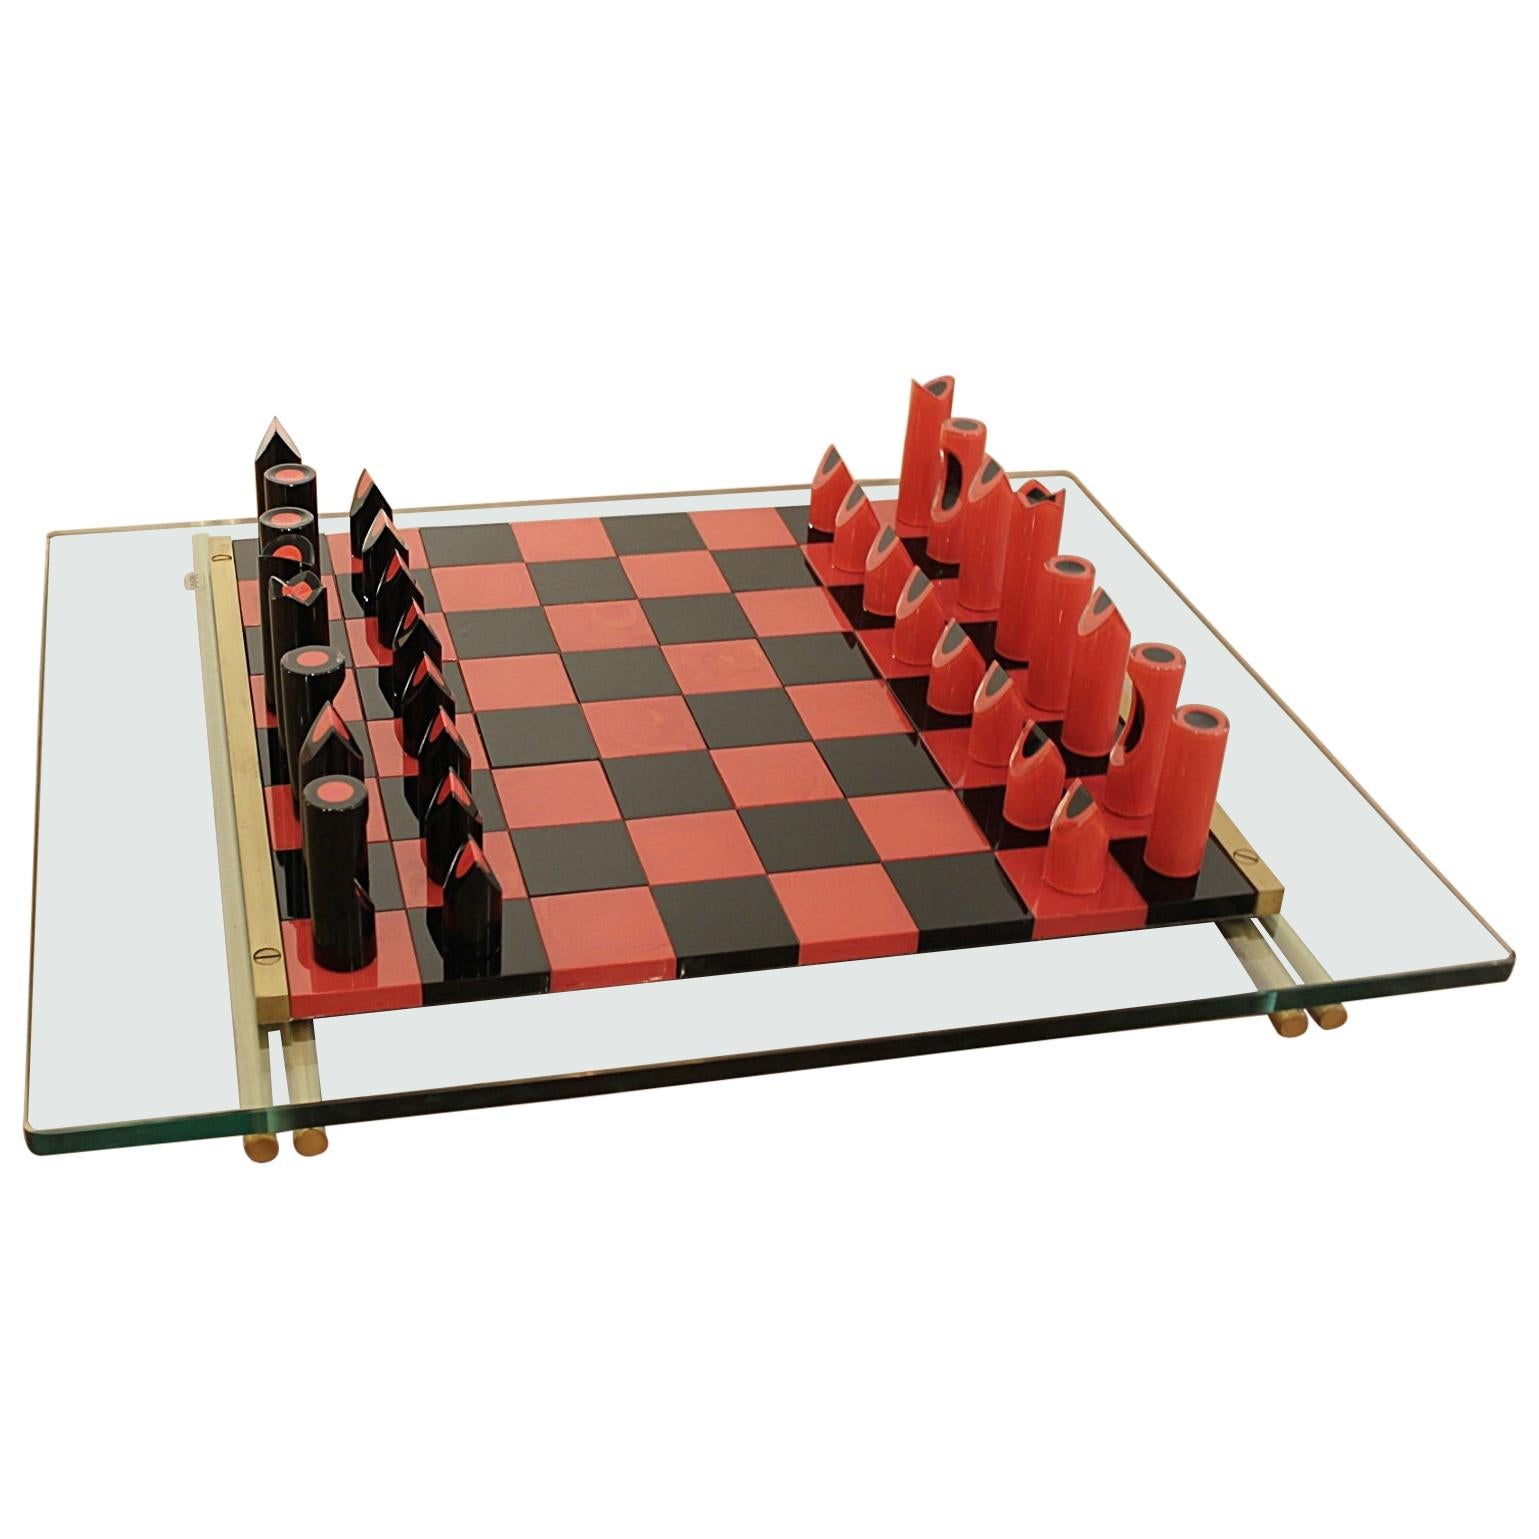 Murano Glass Chess Game by Mario Ticco for VeArt, Italy, 1983